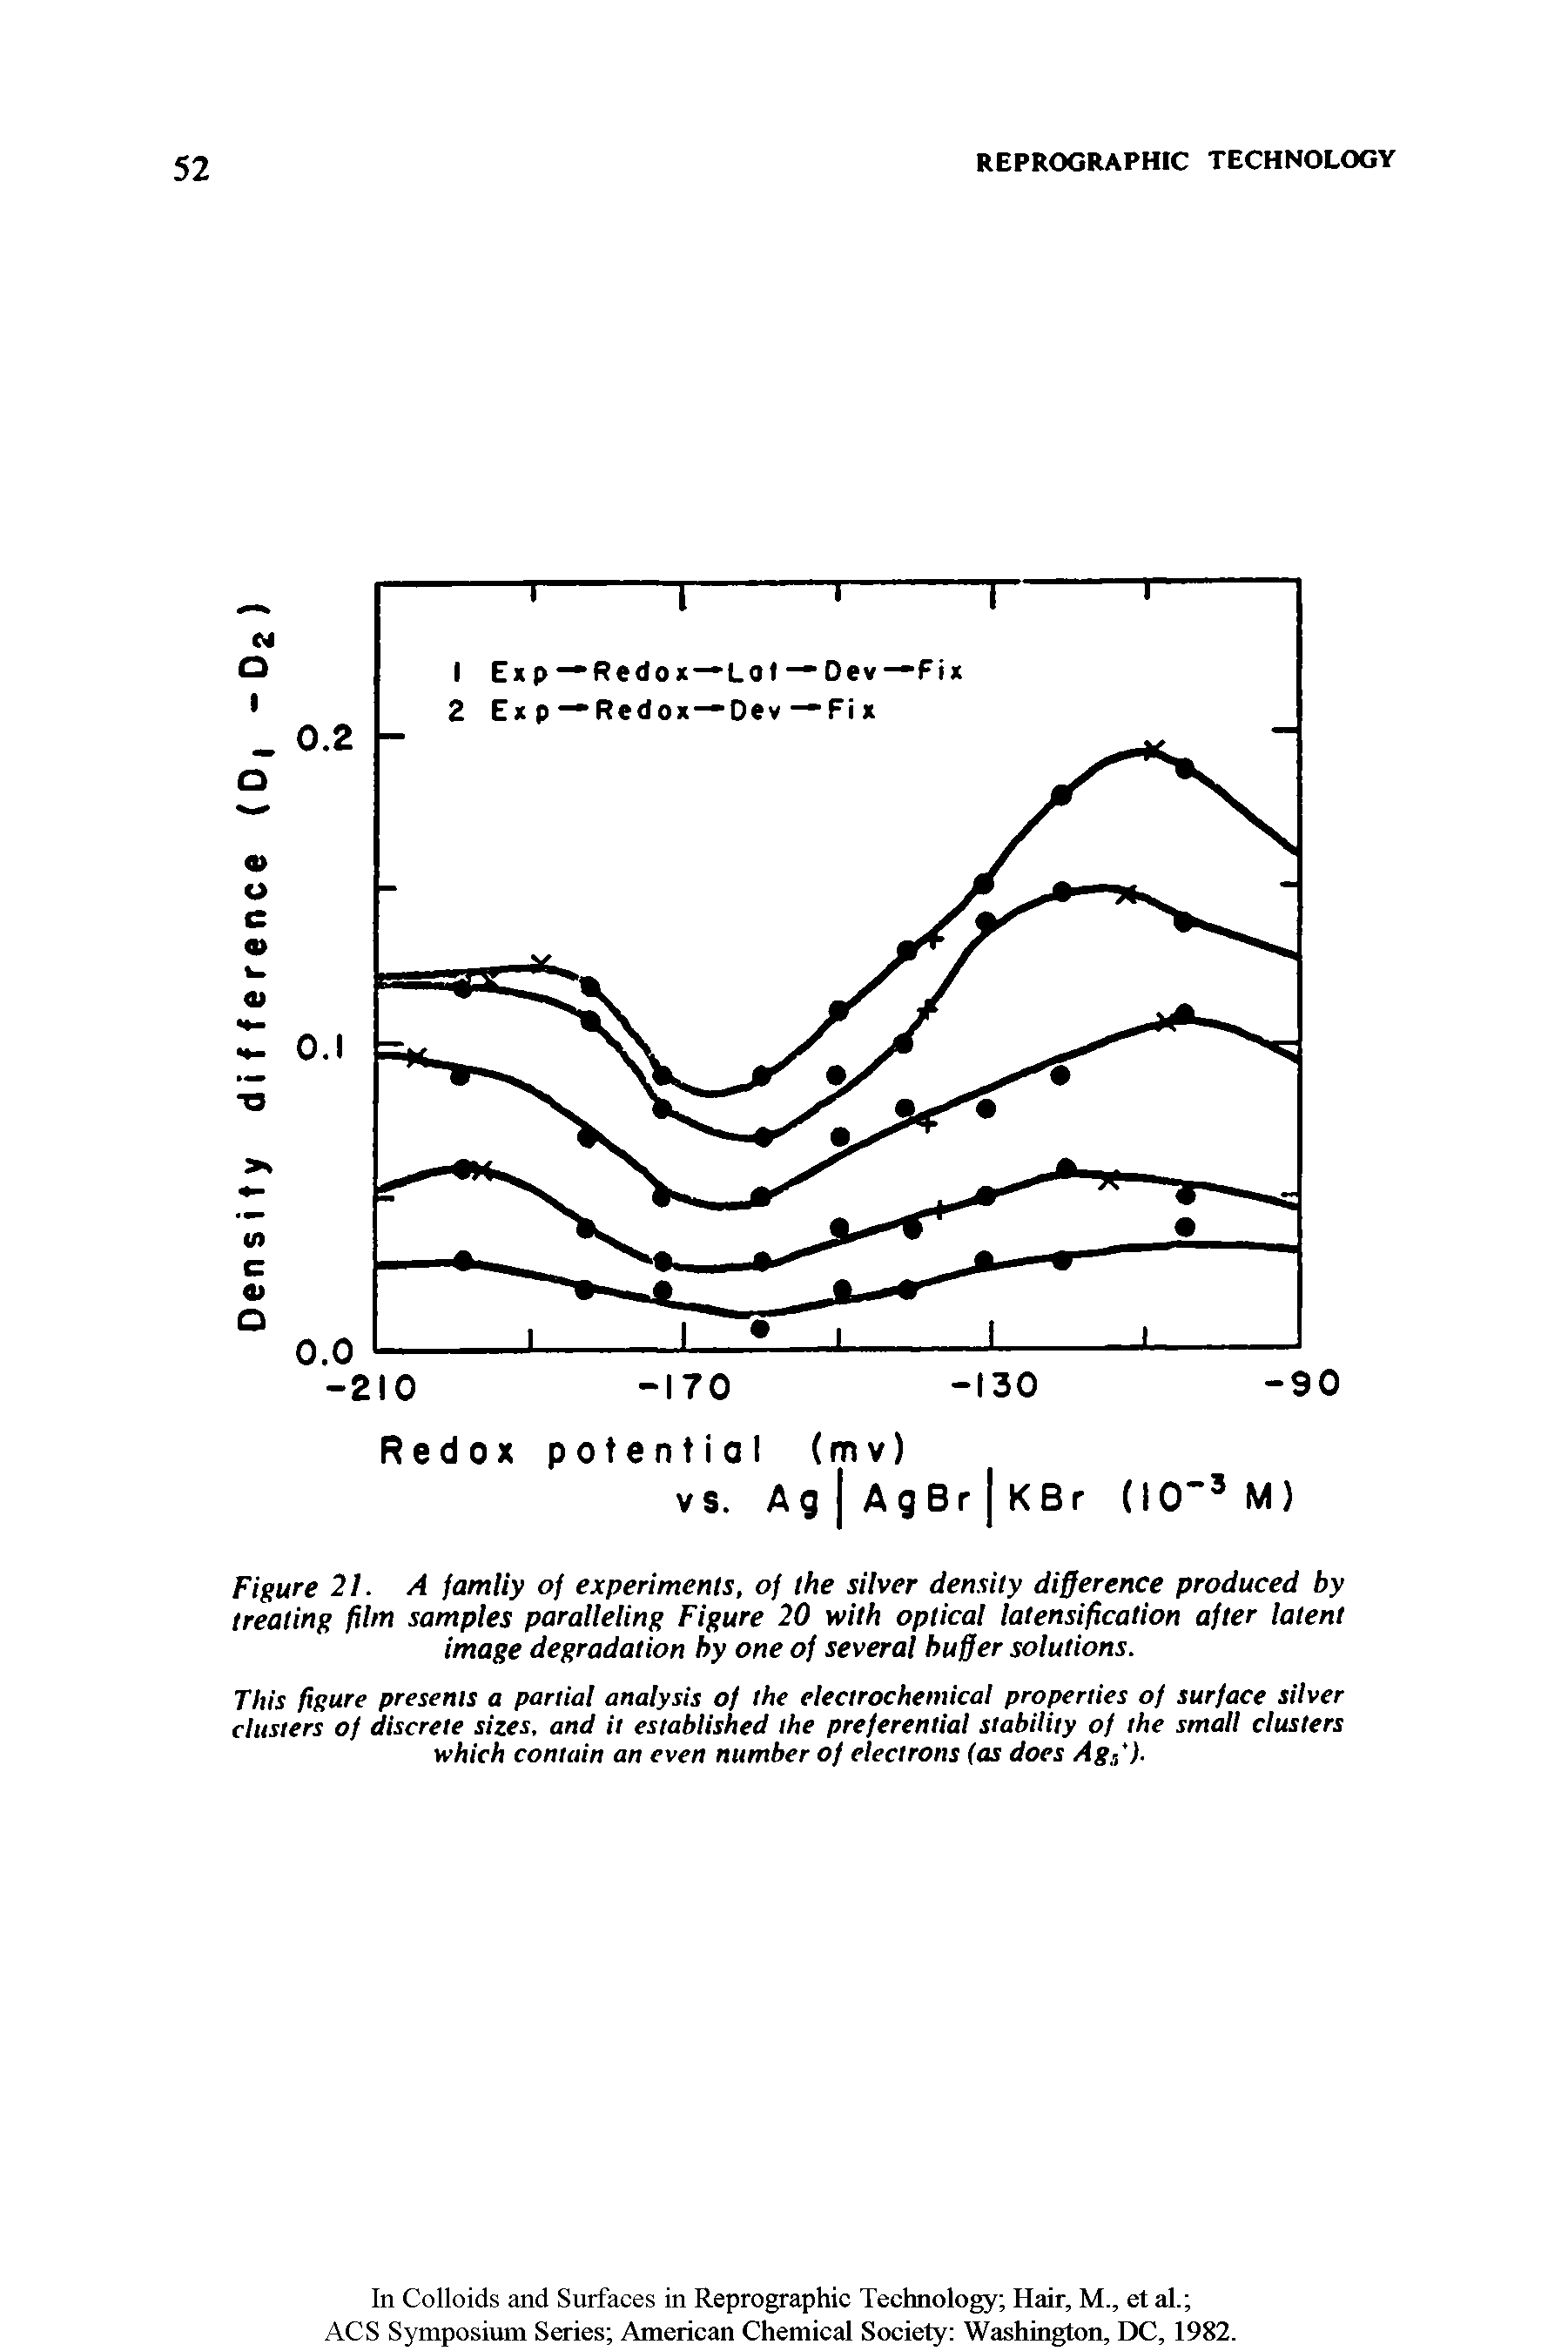 Figure 21. A family of experiments, of the silver density difference produced by treating film samples paralleling Figure 20 with optical latensification after latent image degradation by one of several buffer solutions.